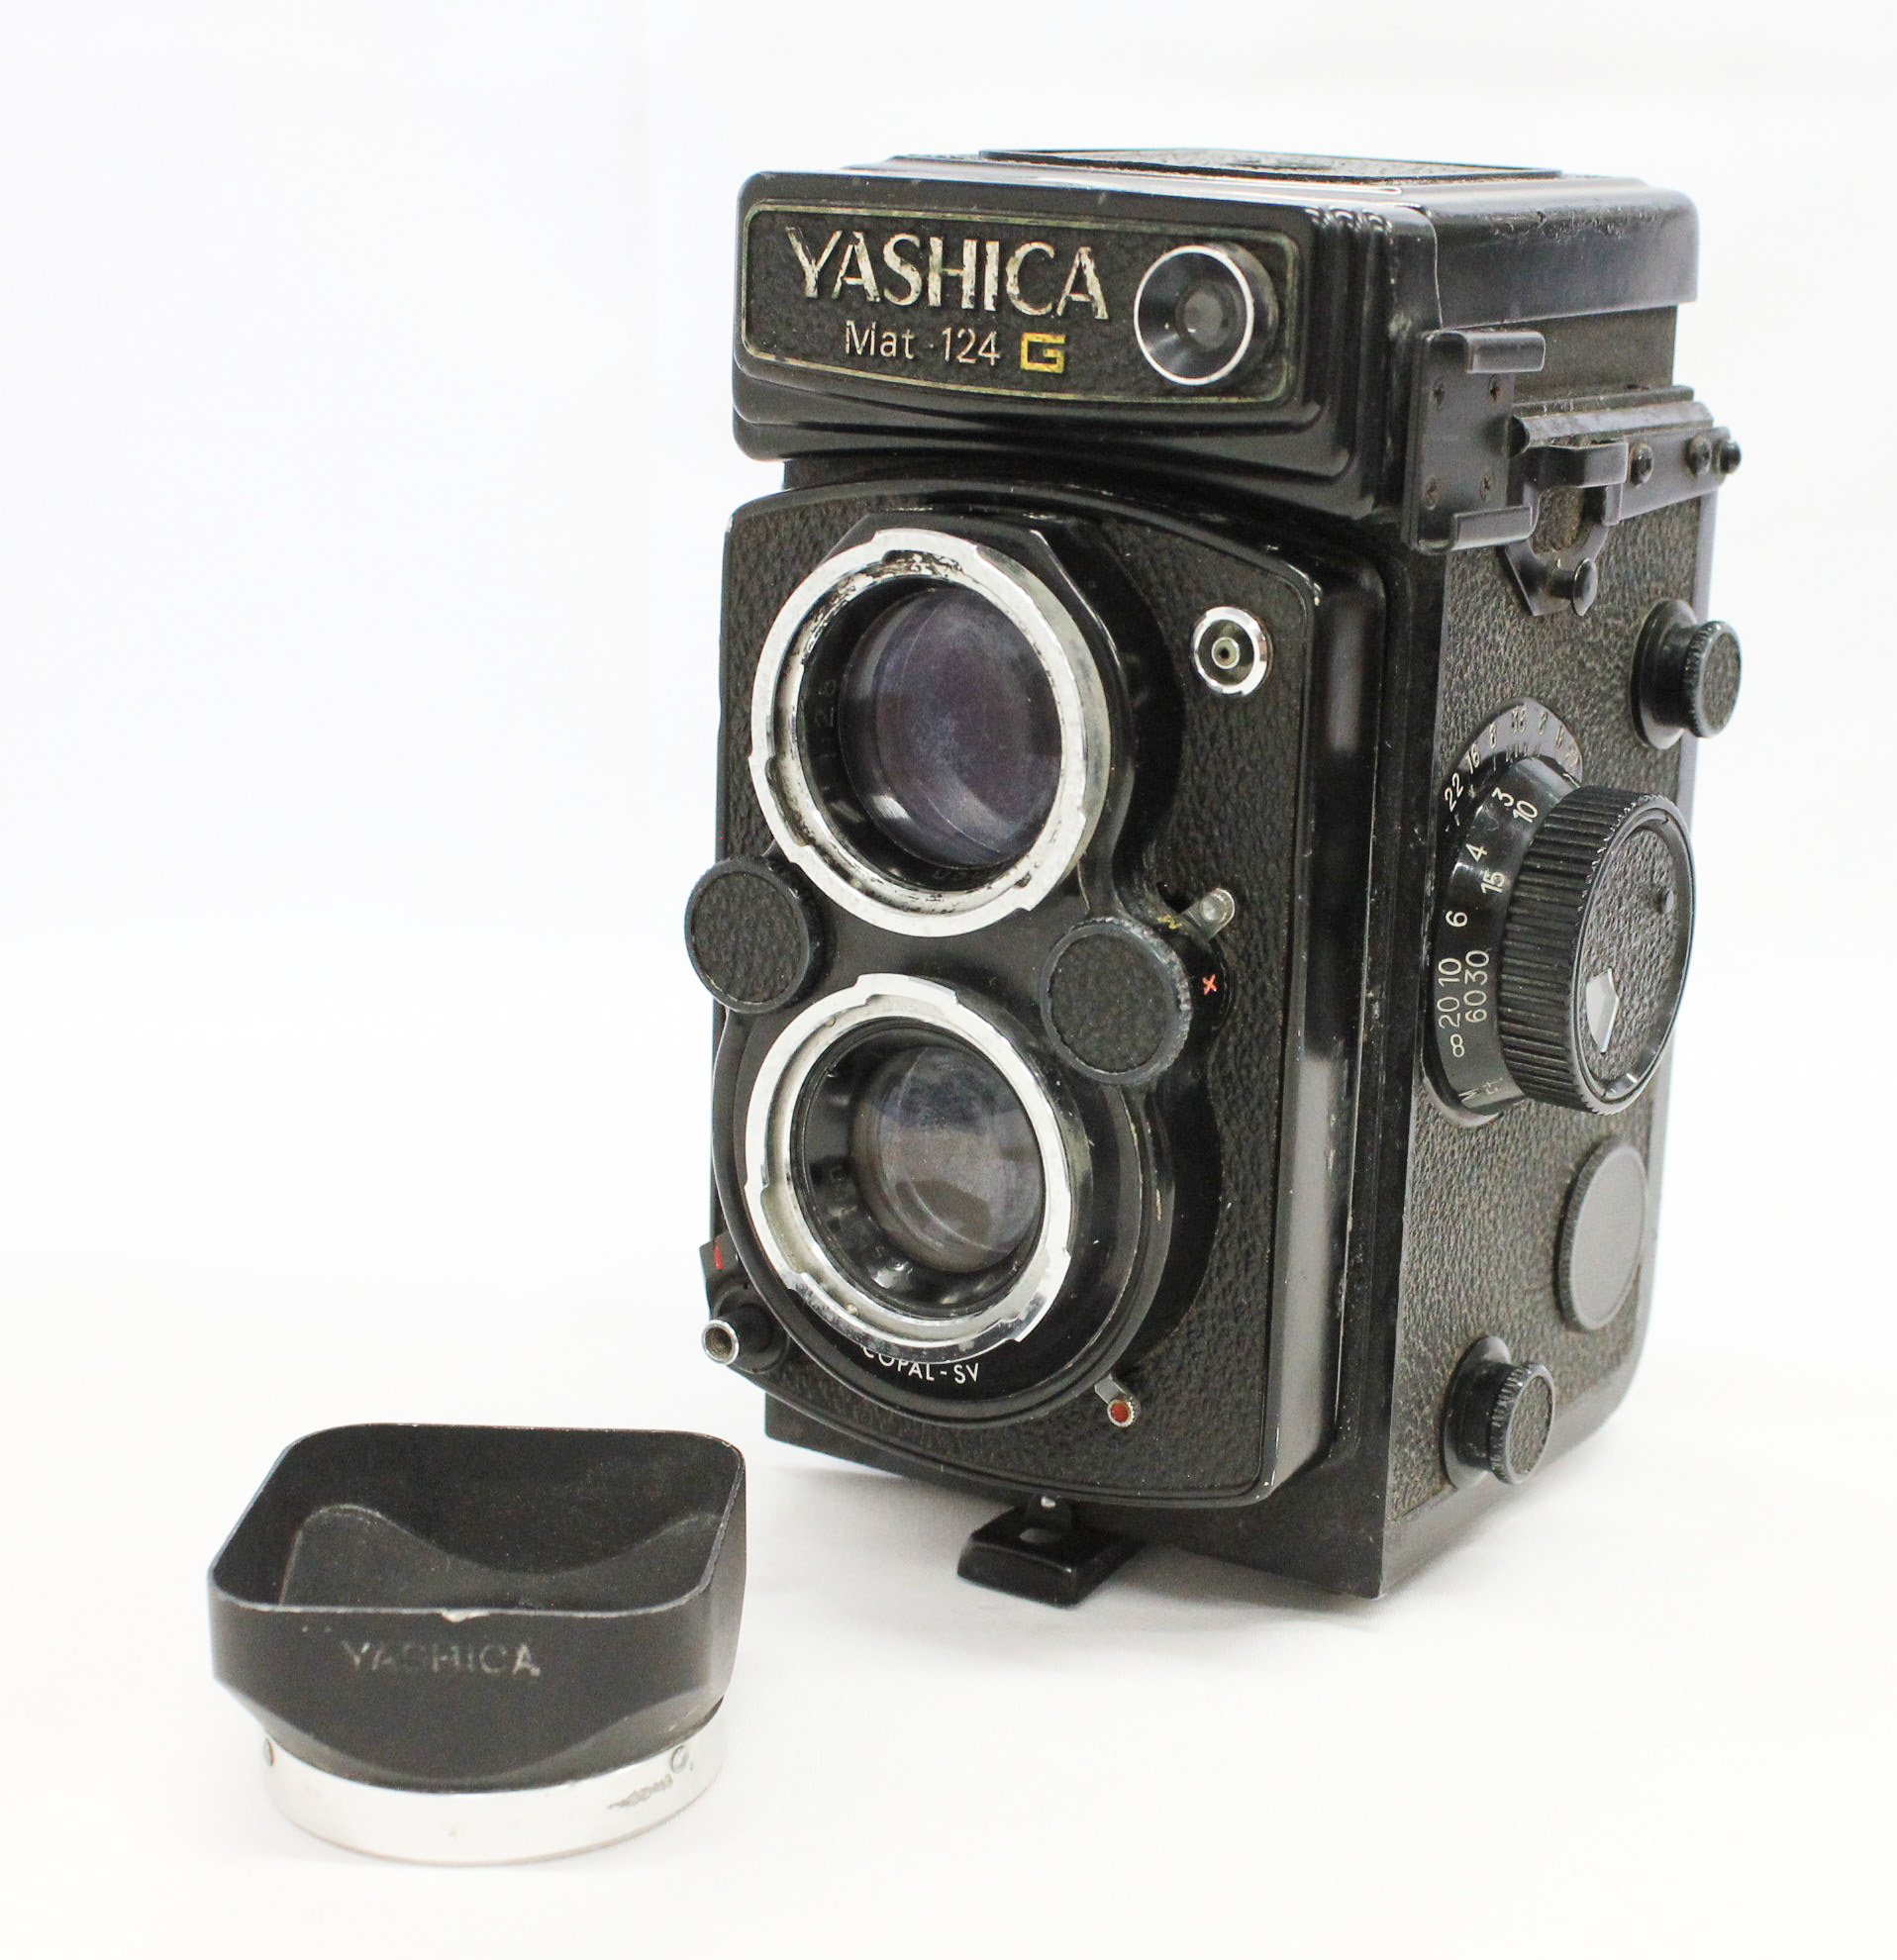 Japan Used Camera Shop | [Excellent+++] Yashica Mat 124G 6x6 Medium Format TLR Film Camera Yashinon Lens 80mm with Hood from Japan